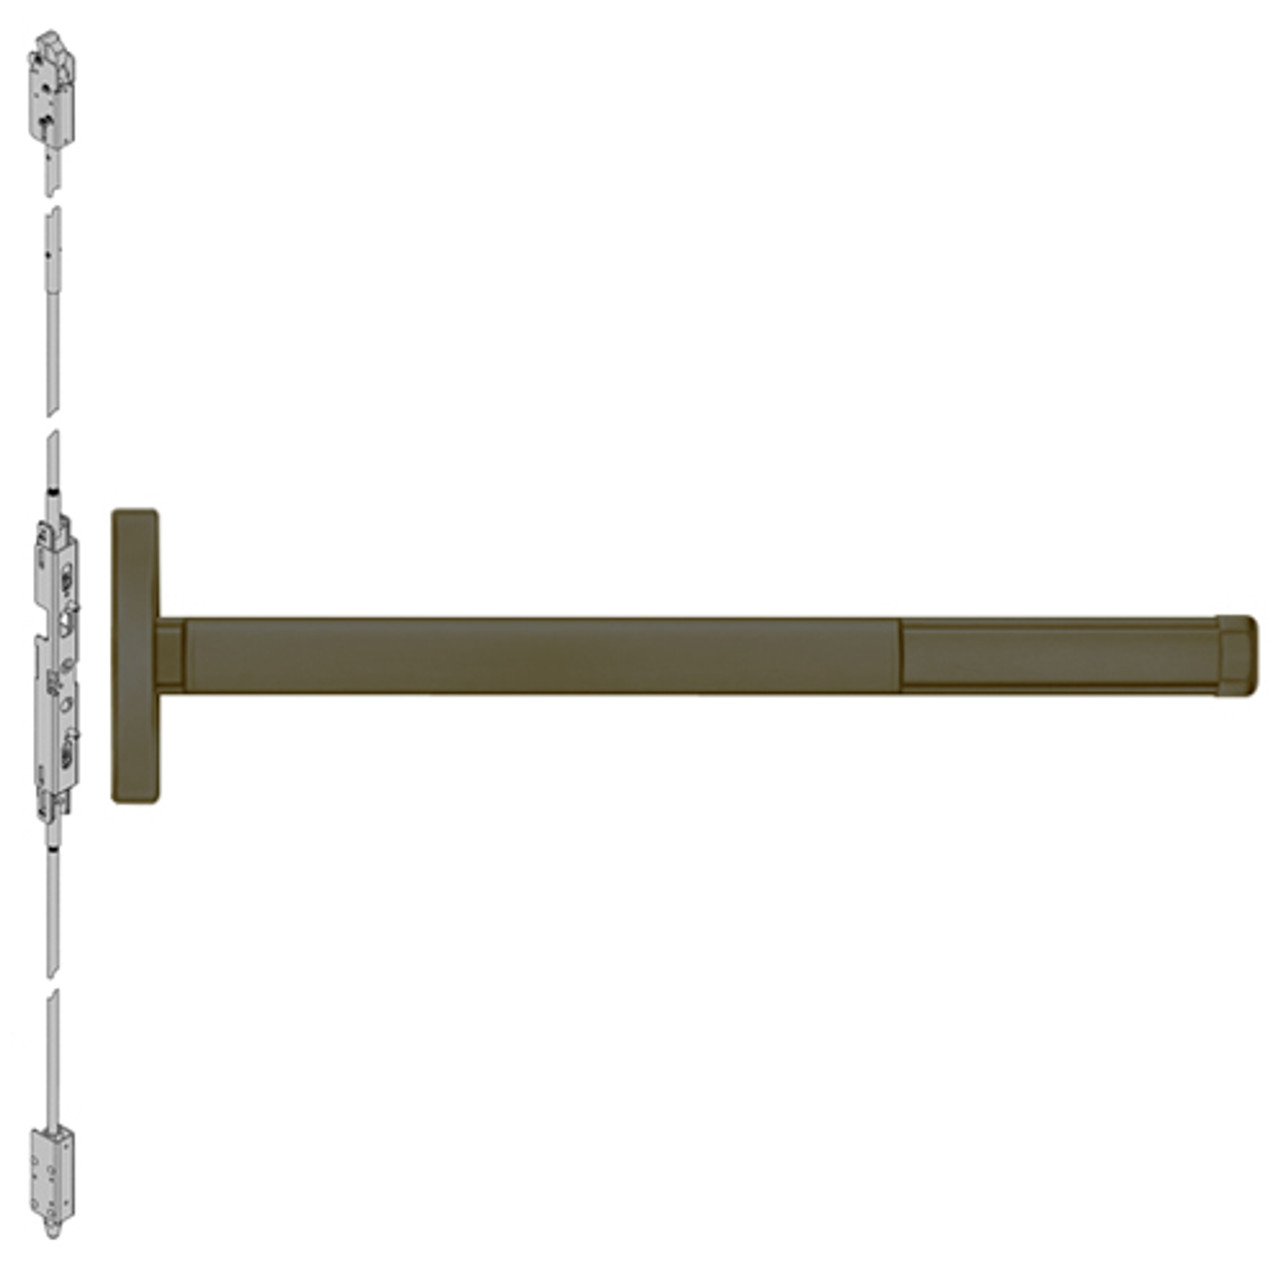 2603LBR-613-48 PHI 2600 Series Non Fire Rated Concealed Vertical Rod Exit Device Prepped for Key Retracts Latchbolt with Less Bottom Rod in Oil Rubbed Bronze Finish